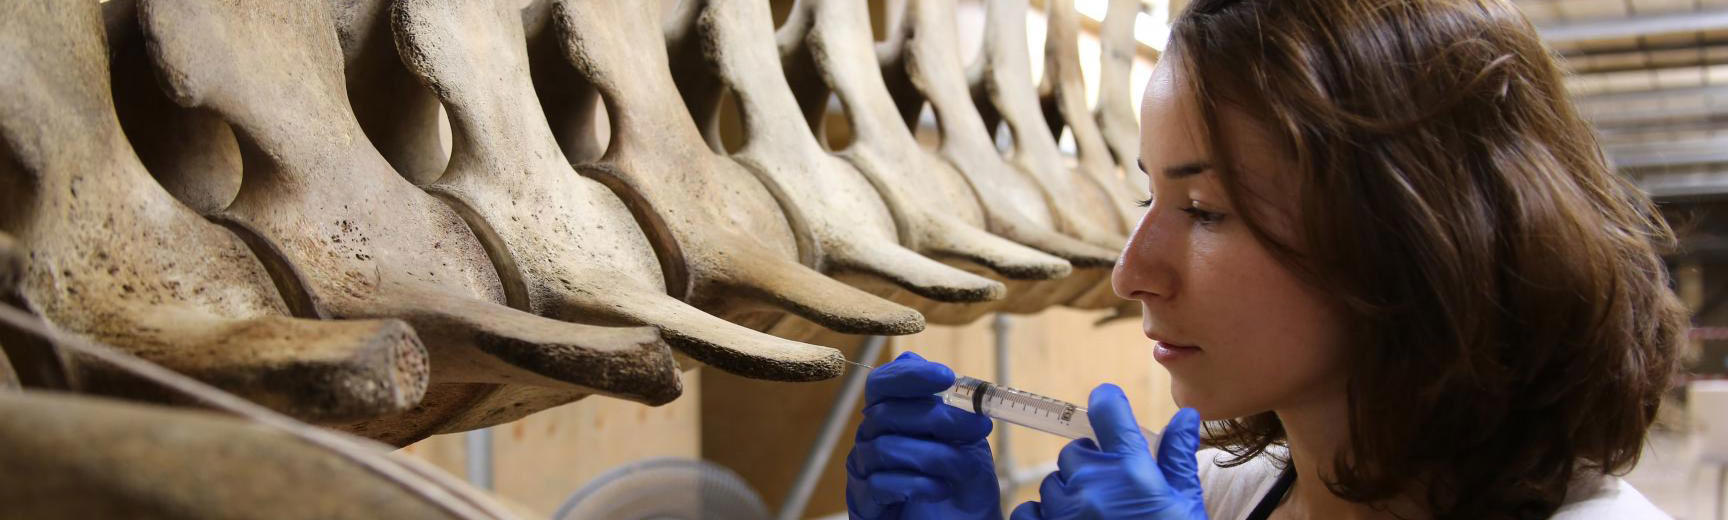 Conservator injecting whale bones with a syringe